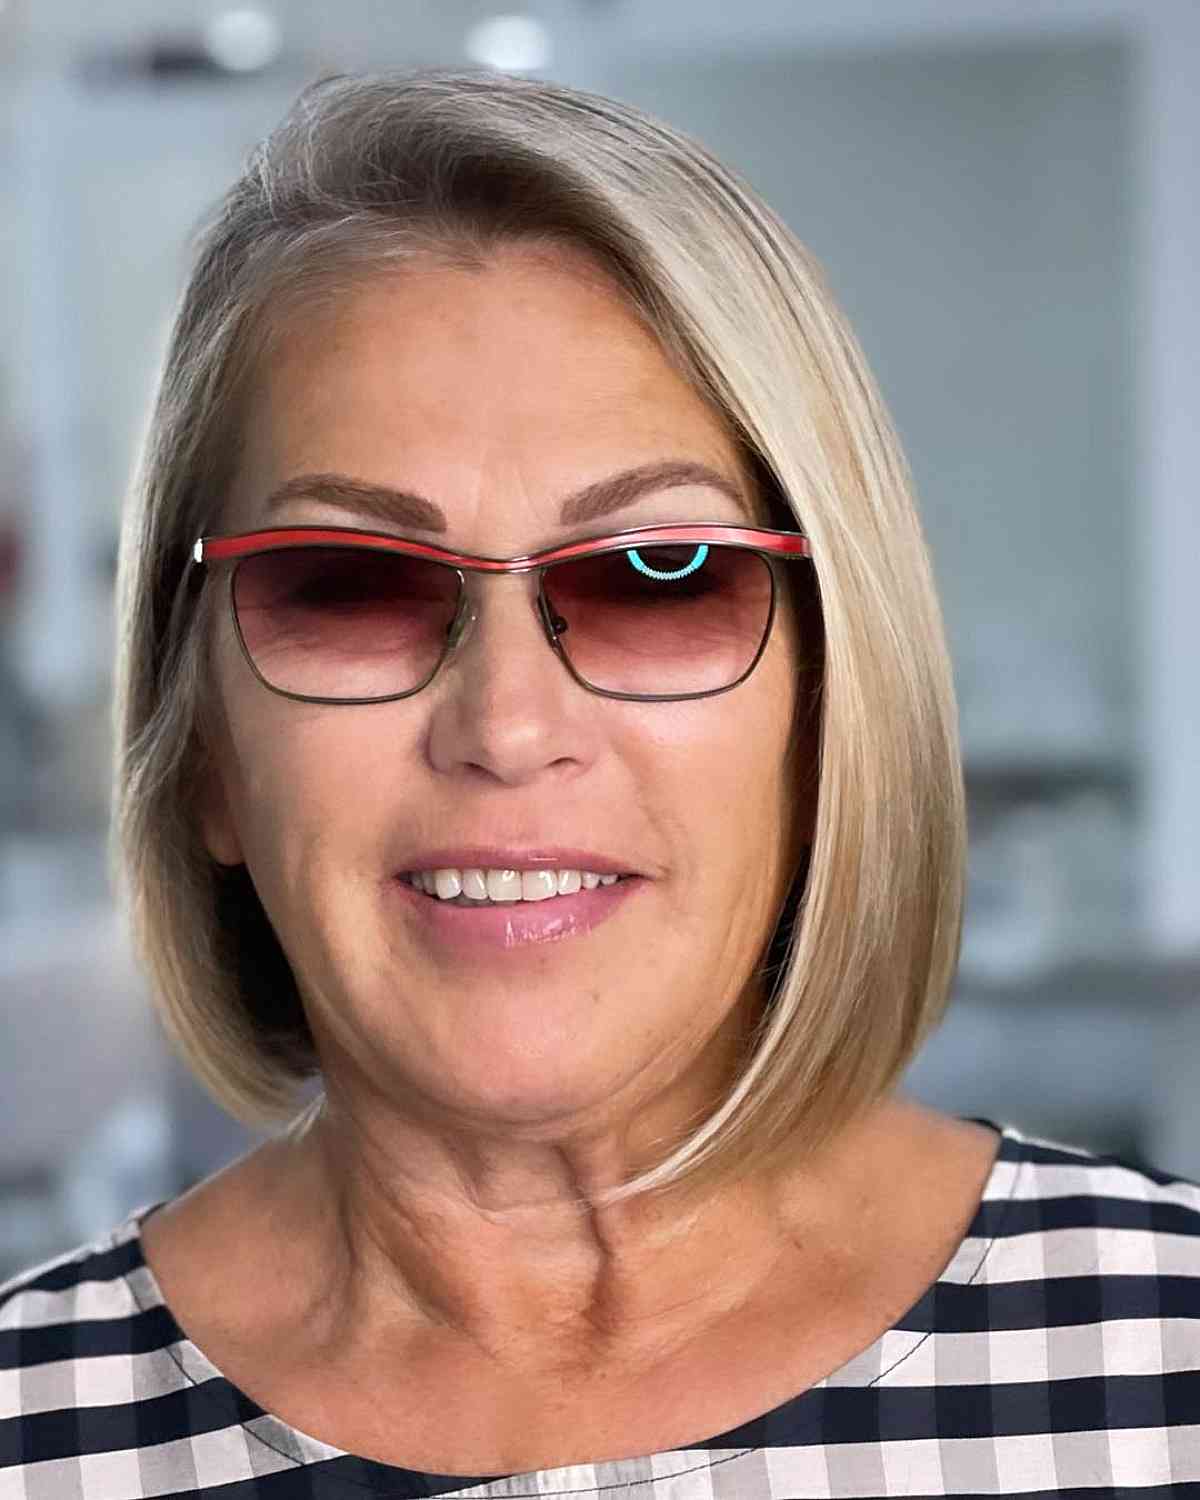 Side-Parted Bob for Older Women with Glasses and Thin Hair